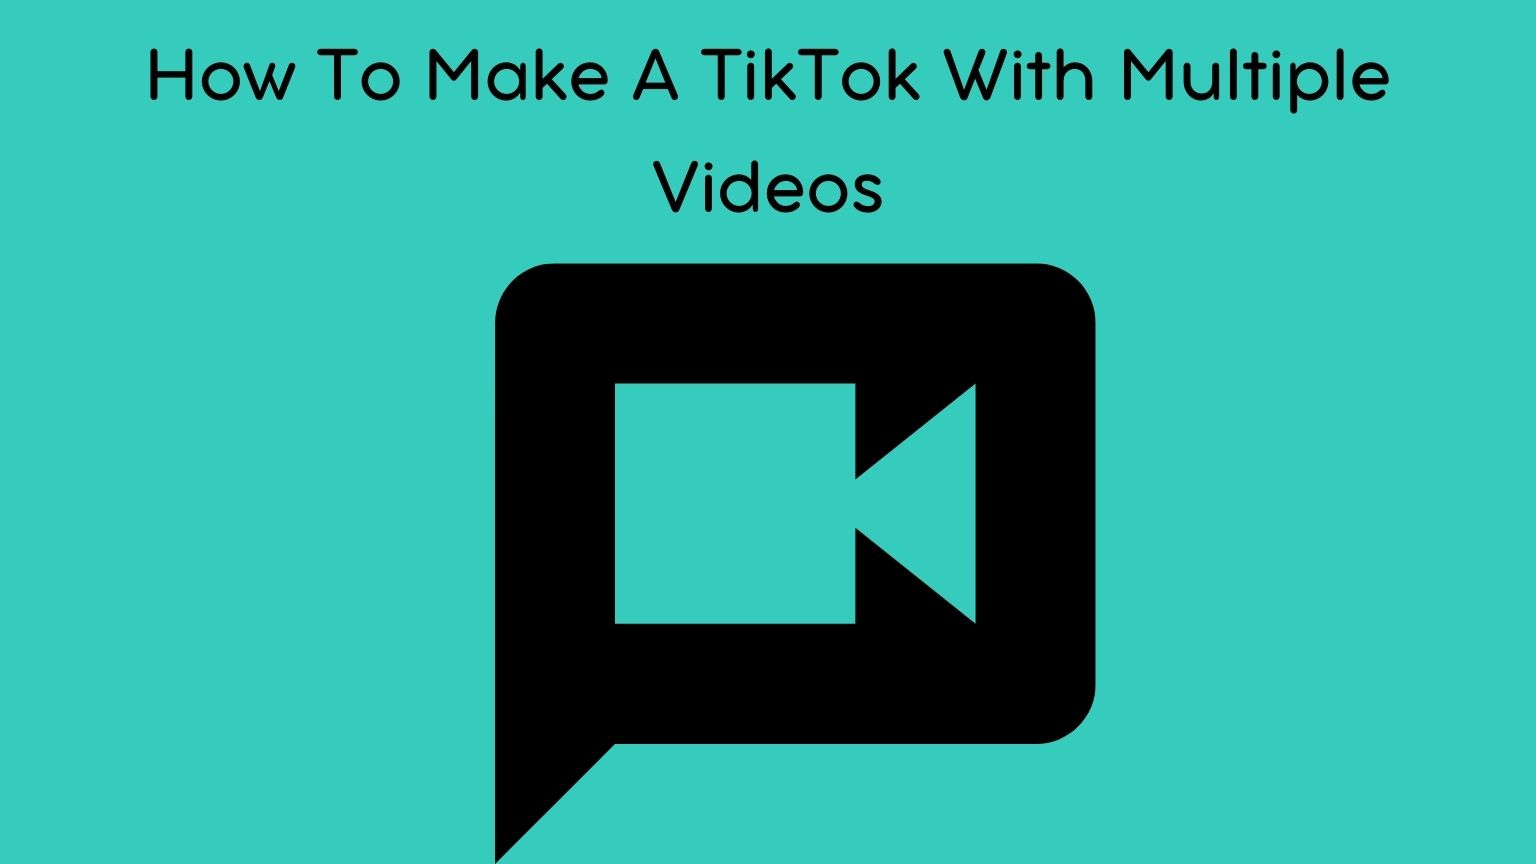 How To Make A TikTok With Multiple Videos